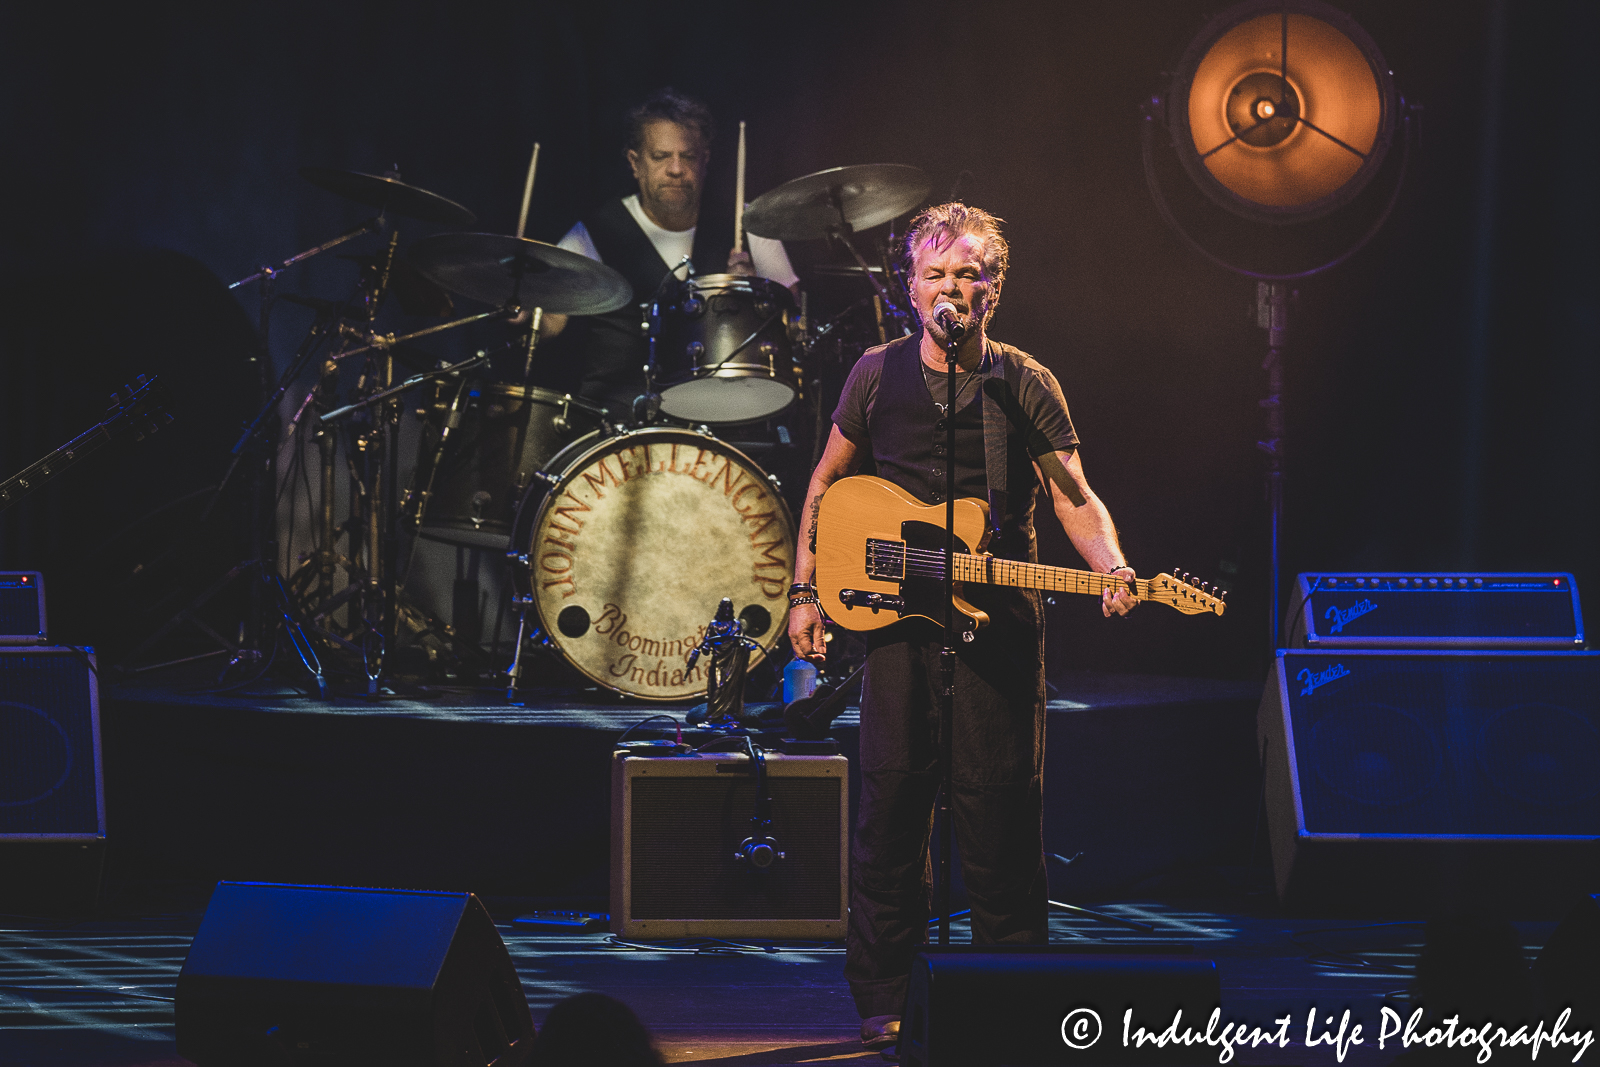 John Mellencamp performing with drummer Dane Clark at The Midland Theatre in downtown Kansas City, MO on April 4, 2023.